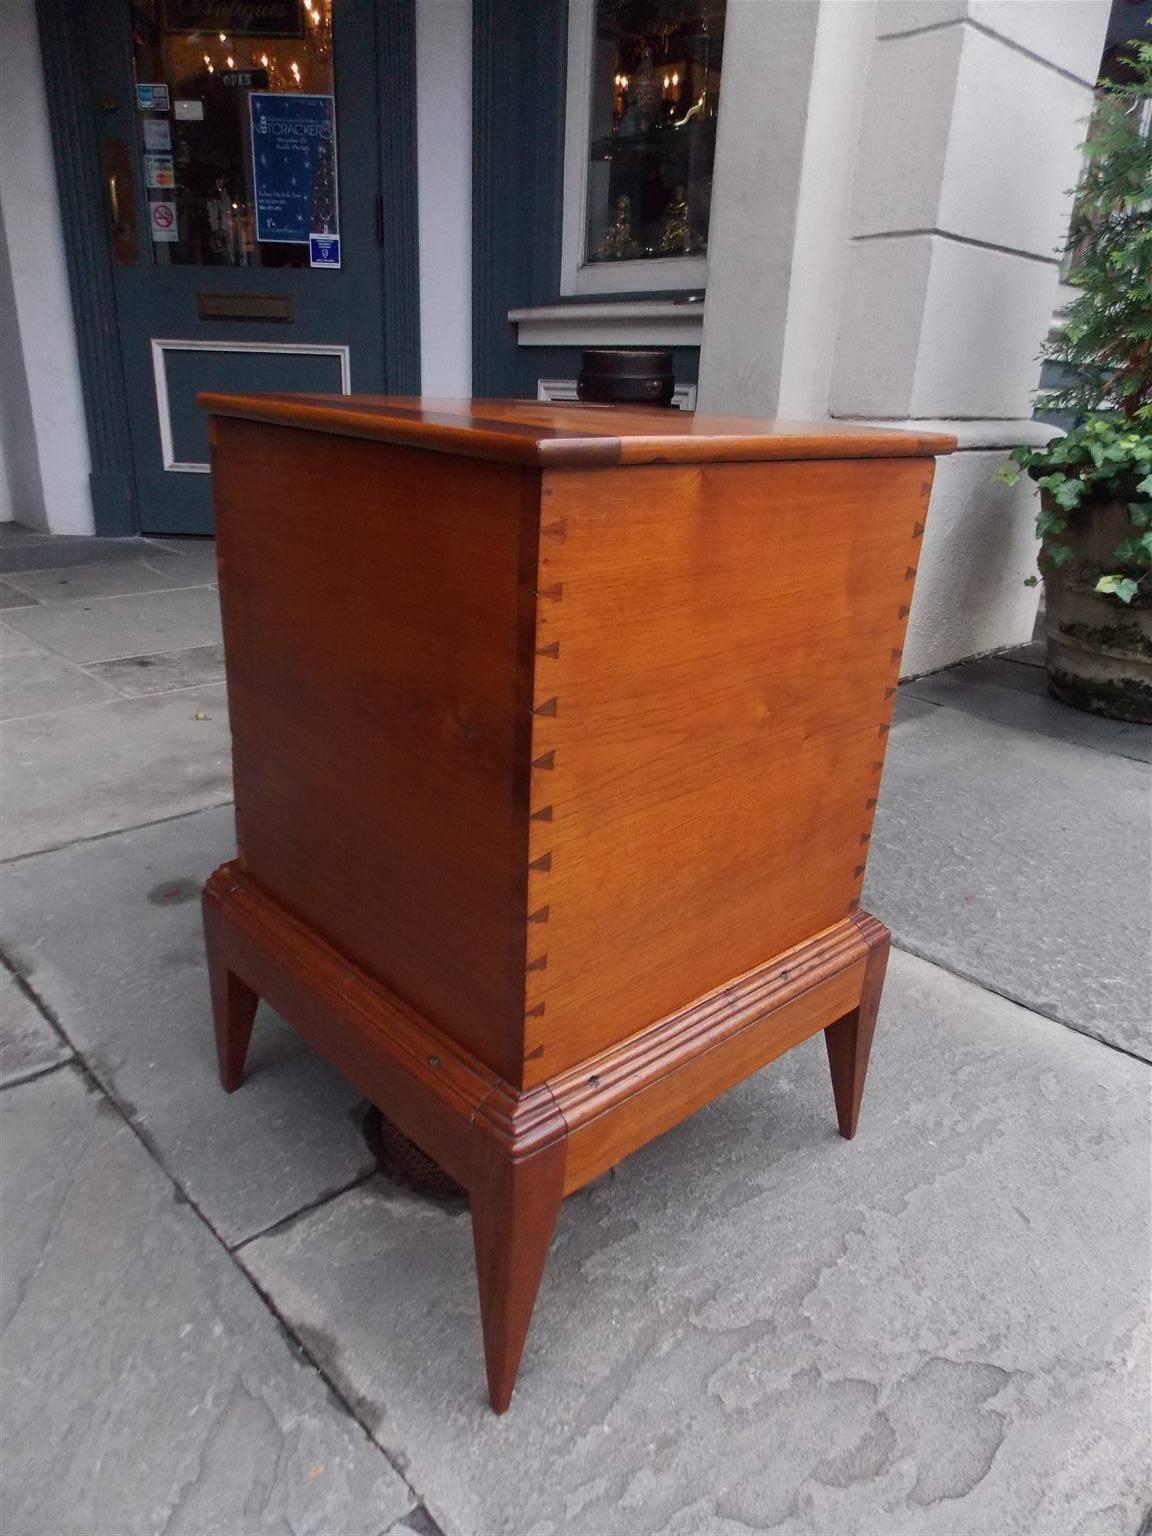 American walnut hinged sugar chest with exposed exterior dovetails and resting  on the original incised molded edge stand with pointed cone feet. Secondary wood consist of Tulip poplar. Early 19th Century, Tennessee / Kentucky.